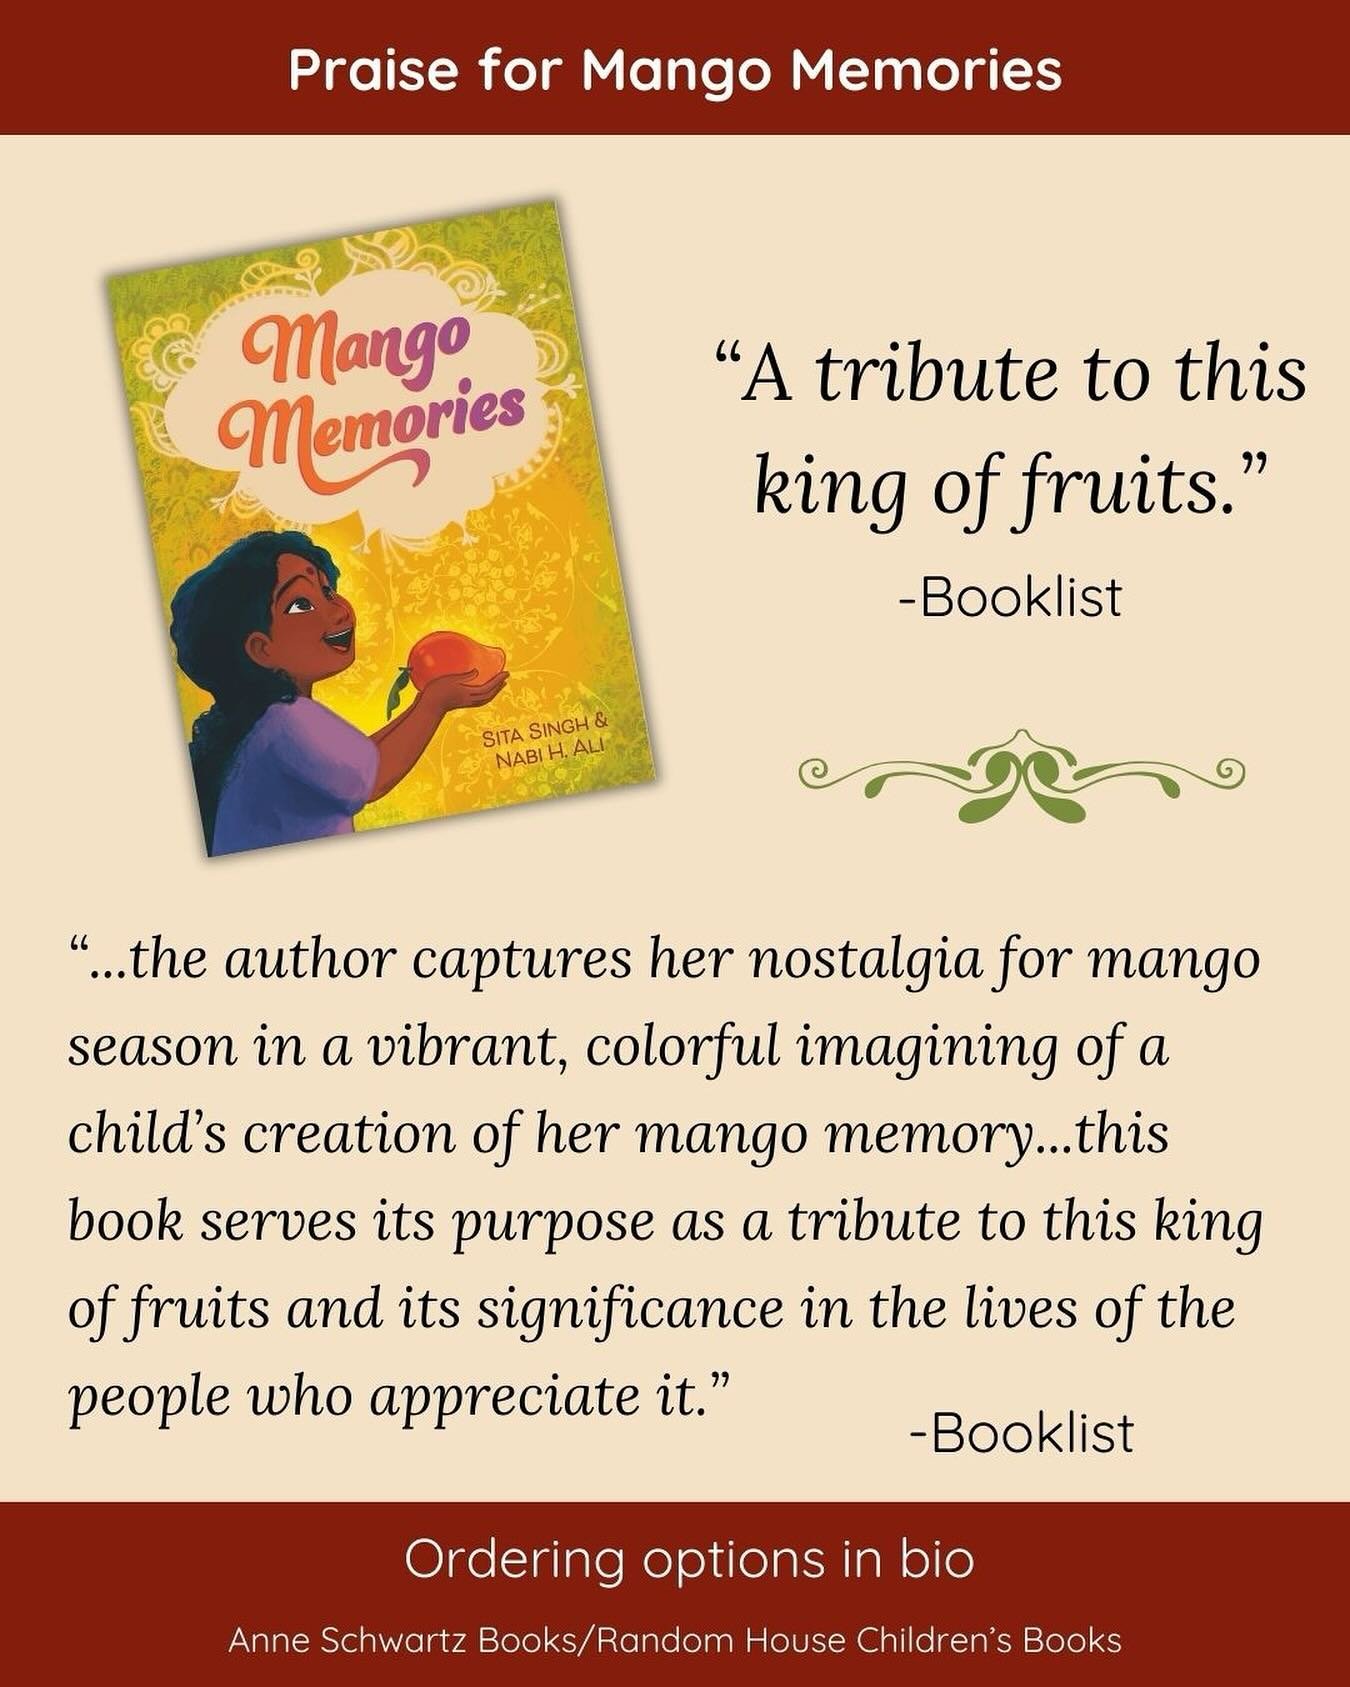 We are thrilled and grateful for another lovely review of MANGO MEMORIES, this time from Booklist of American Library Association! 🥰

Get your copy today. Mango Memories is available everywhere books are sold. 

@nabihaiderali @anneschwartzbooks @ra